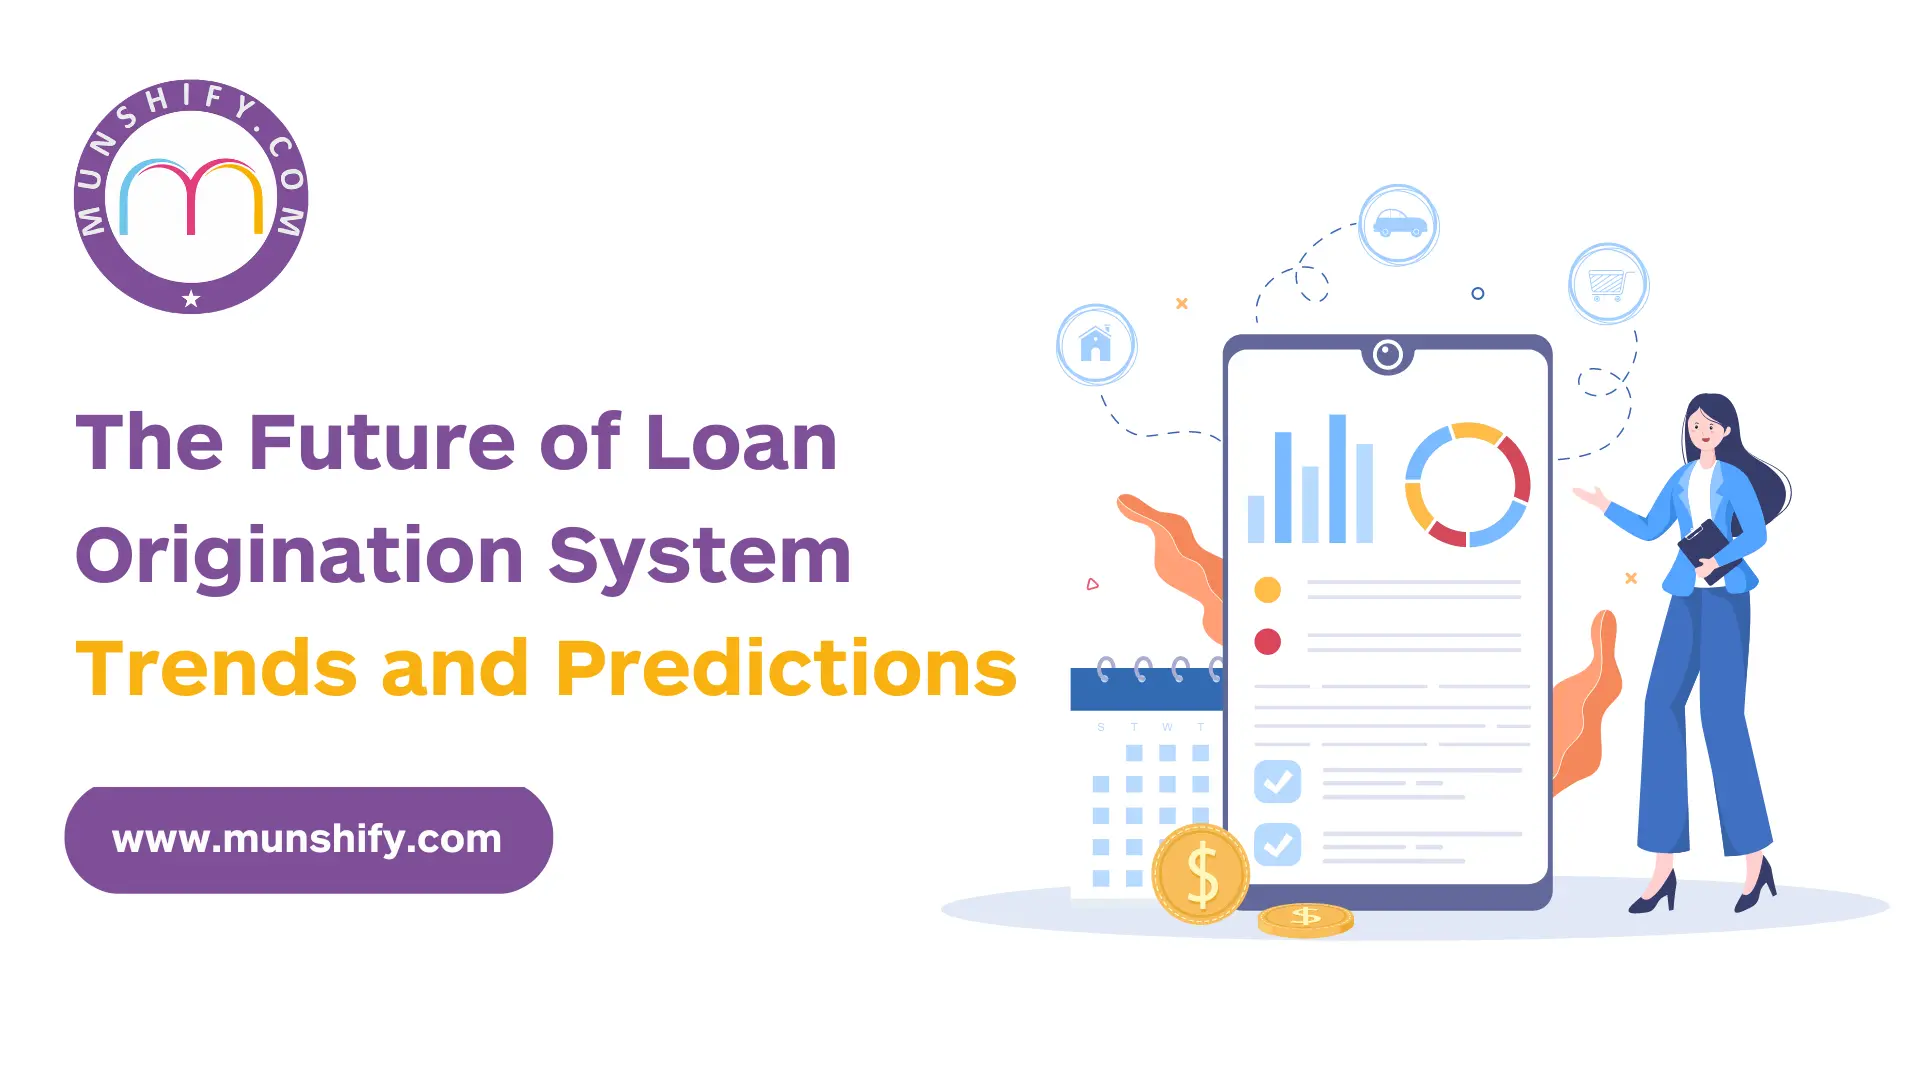 The Future of Loan Origination System: Trends and Predictions.